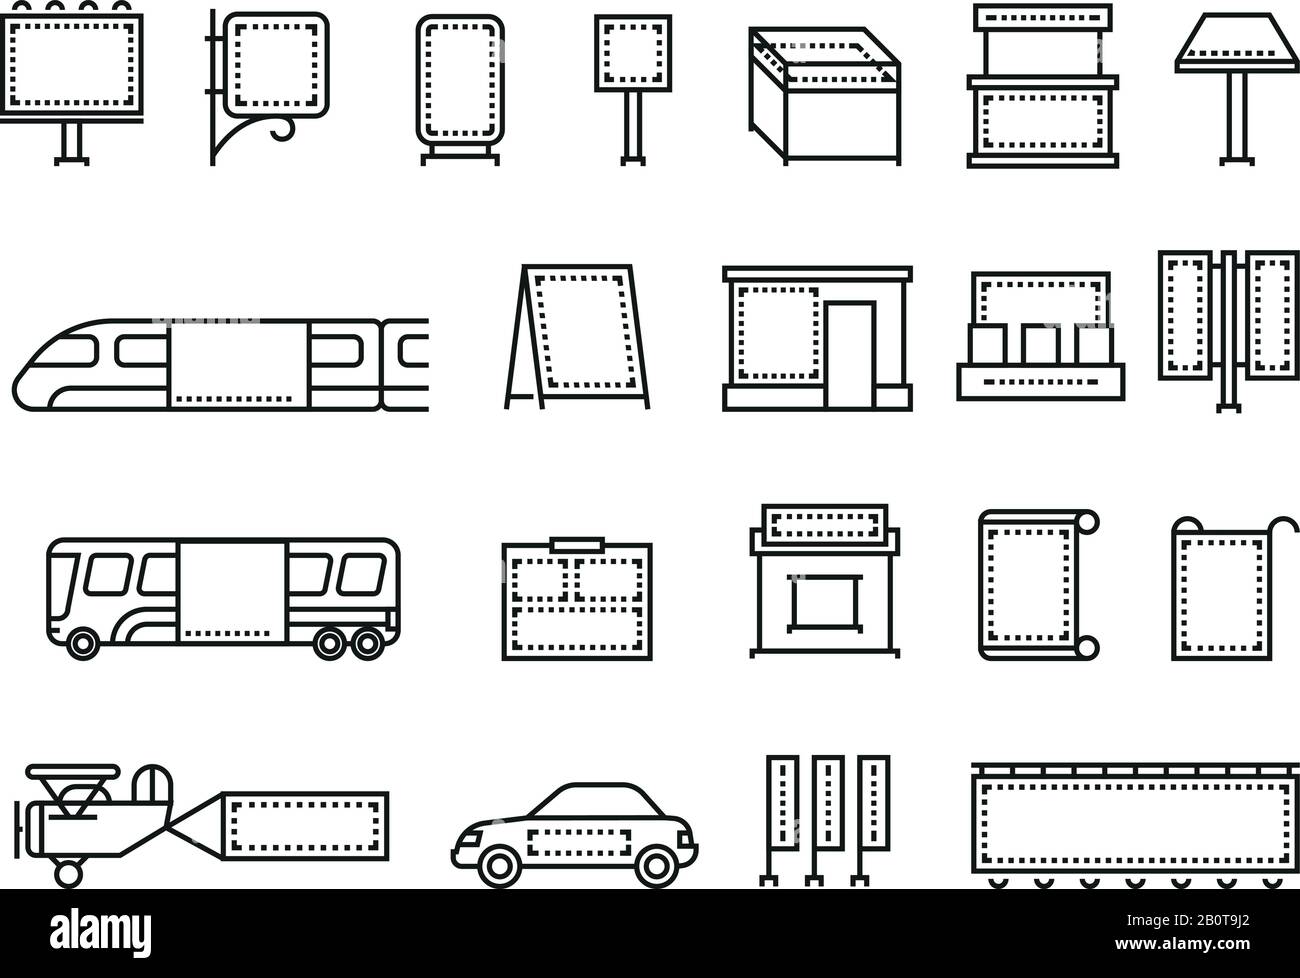 Outdoor advertising banners and transport advertise vector line icons. Advertisement billboard on transport, illustration of place for advertising Stock Vector